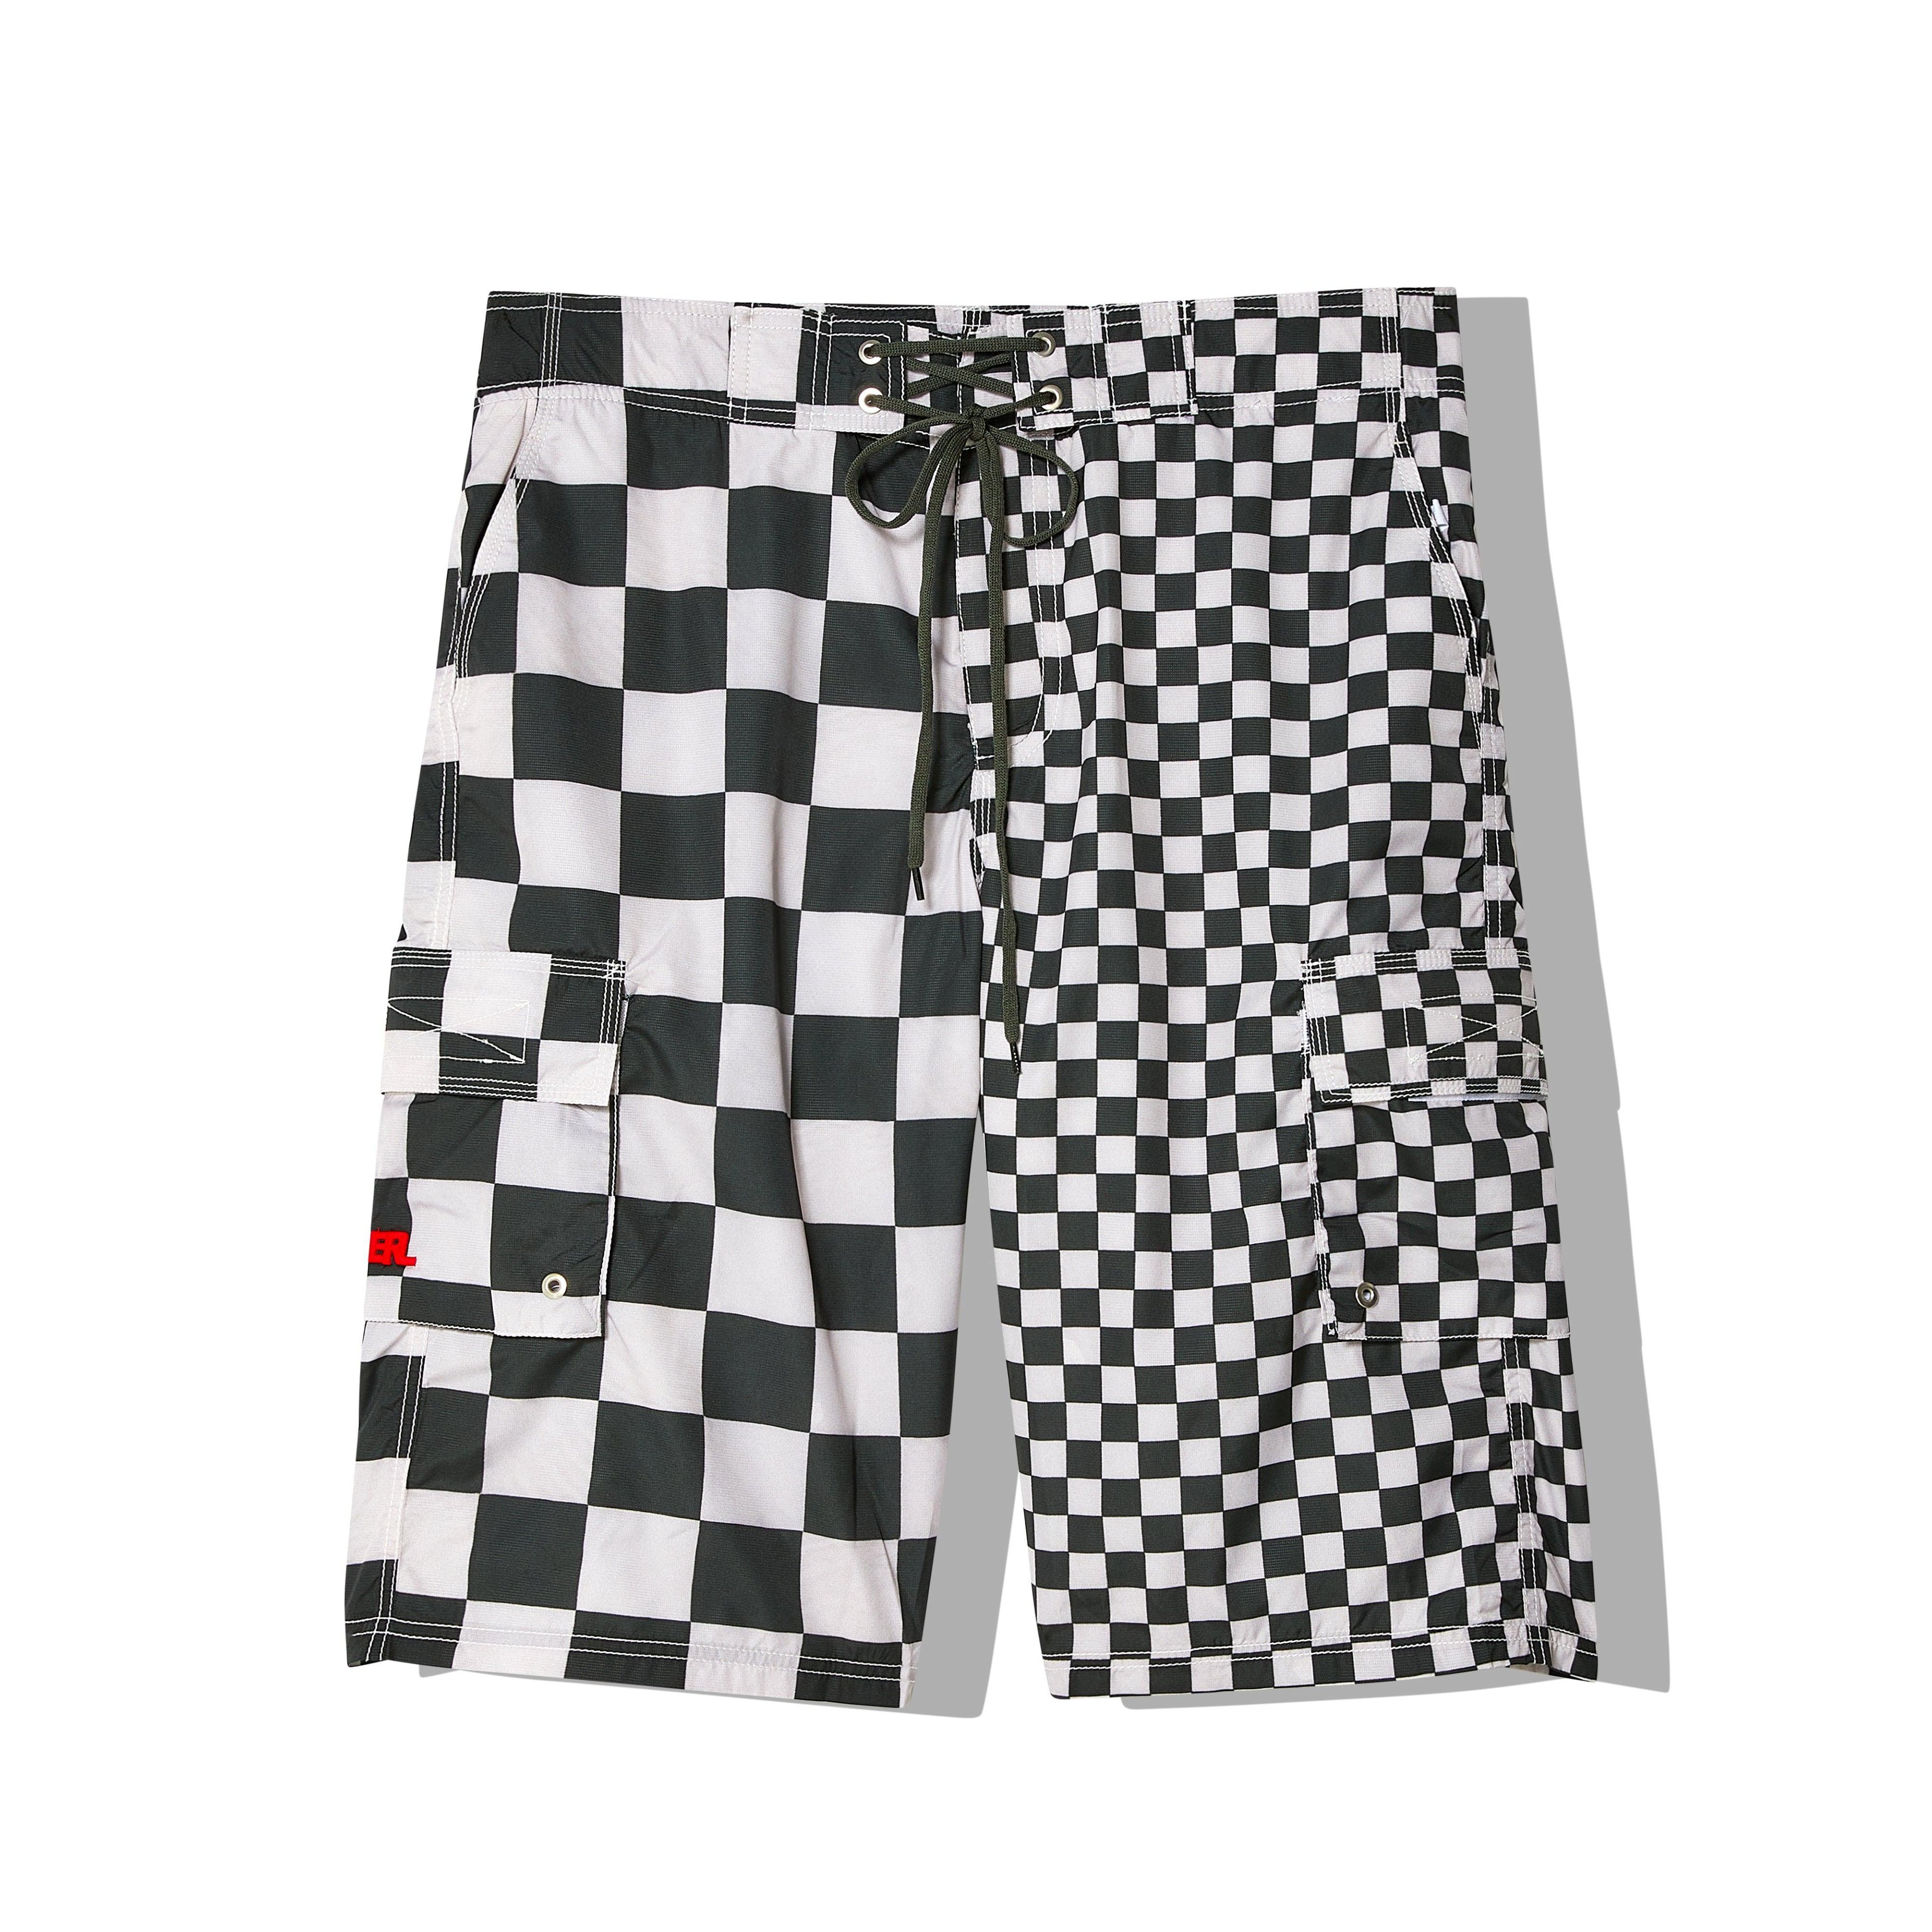 ERL - Men's Printed Swim Shorts - (Checkerboard) by ERL